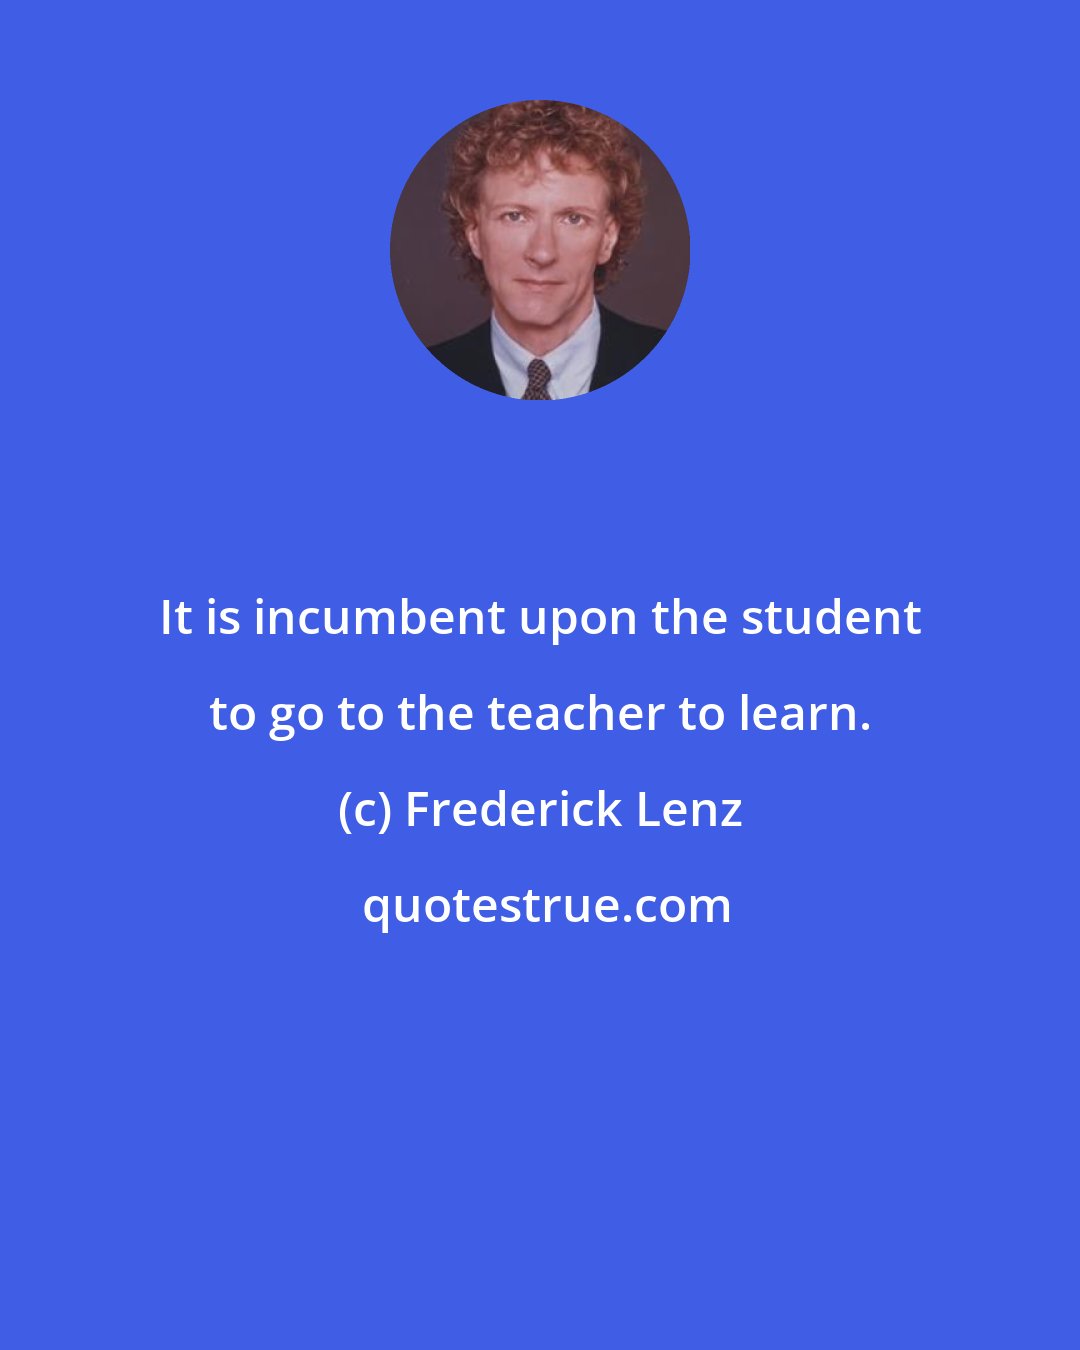 Frederick Lenz: It is incumbent upon the student to go to the teacher to learn.